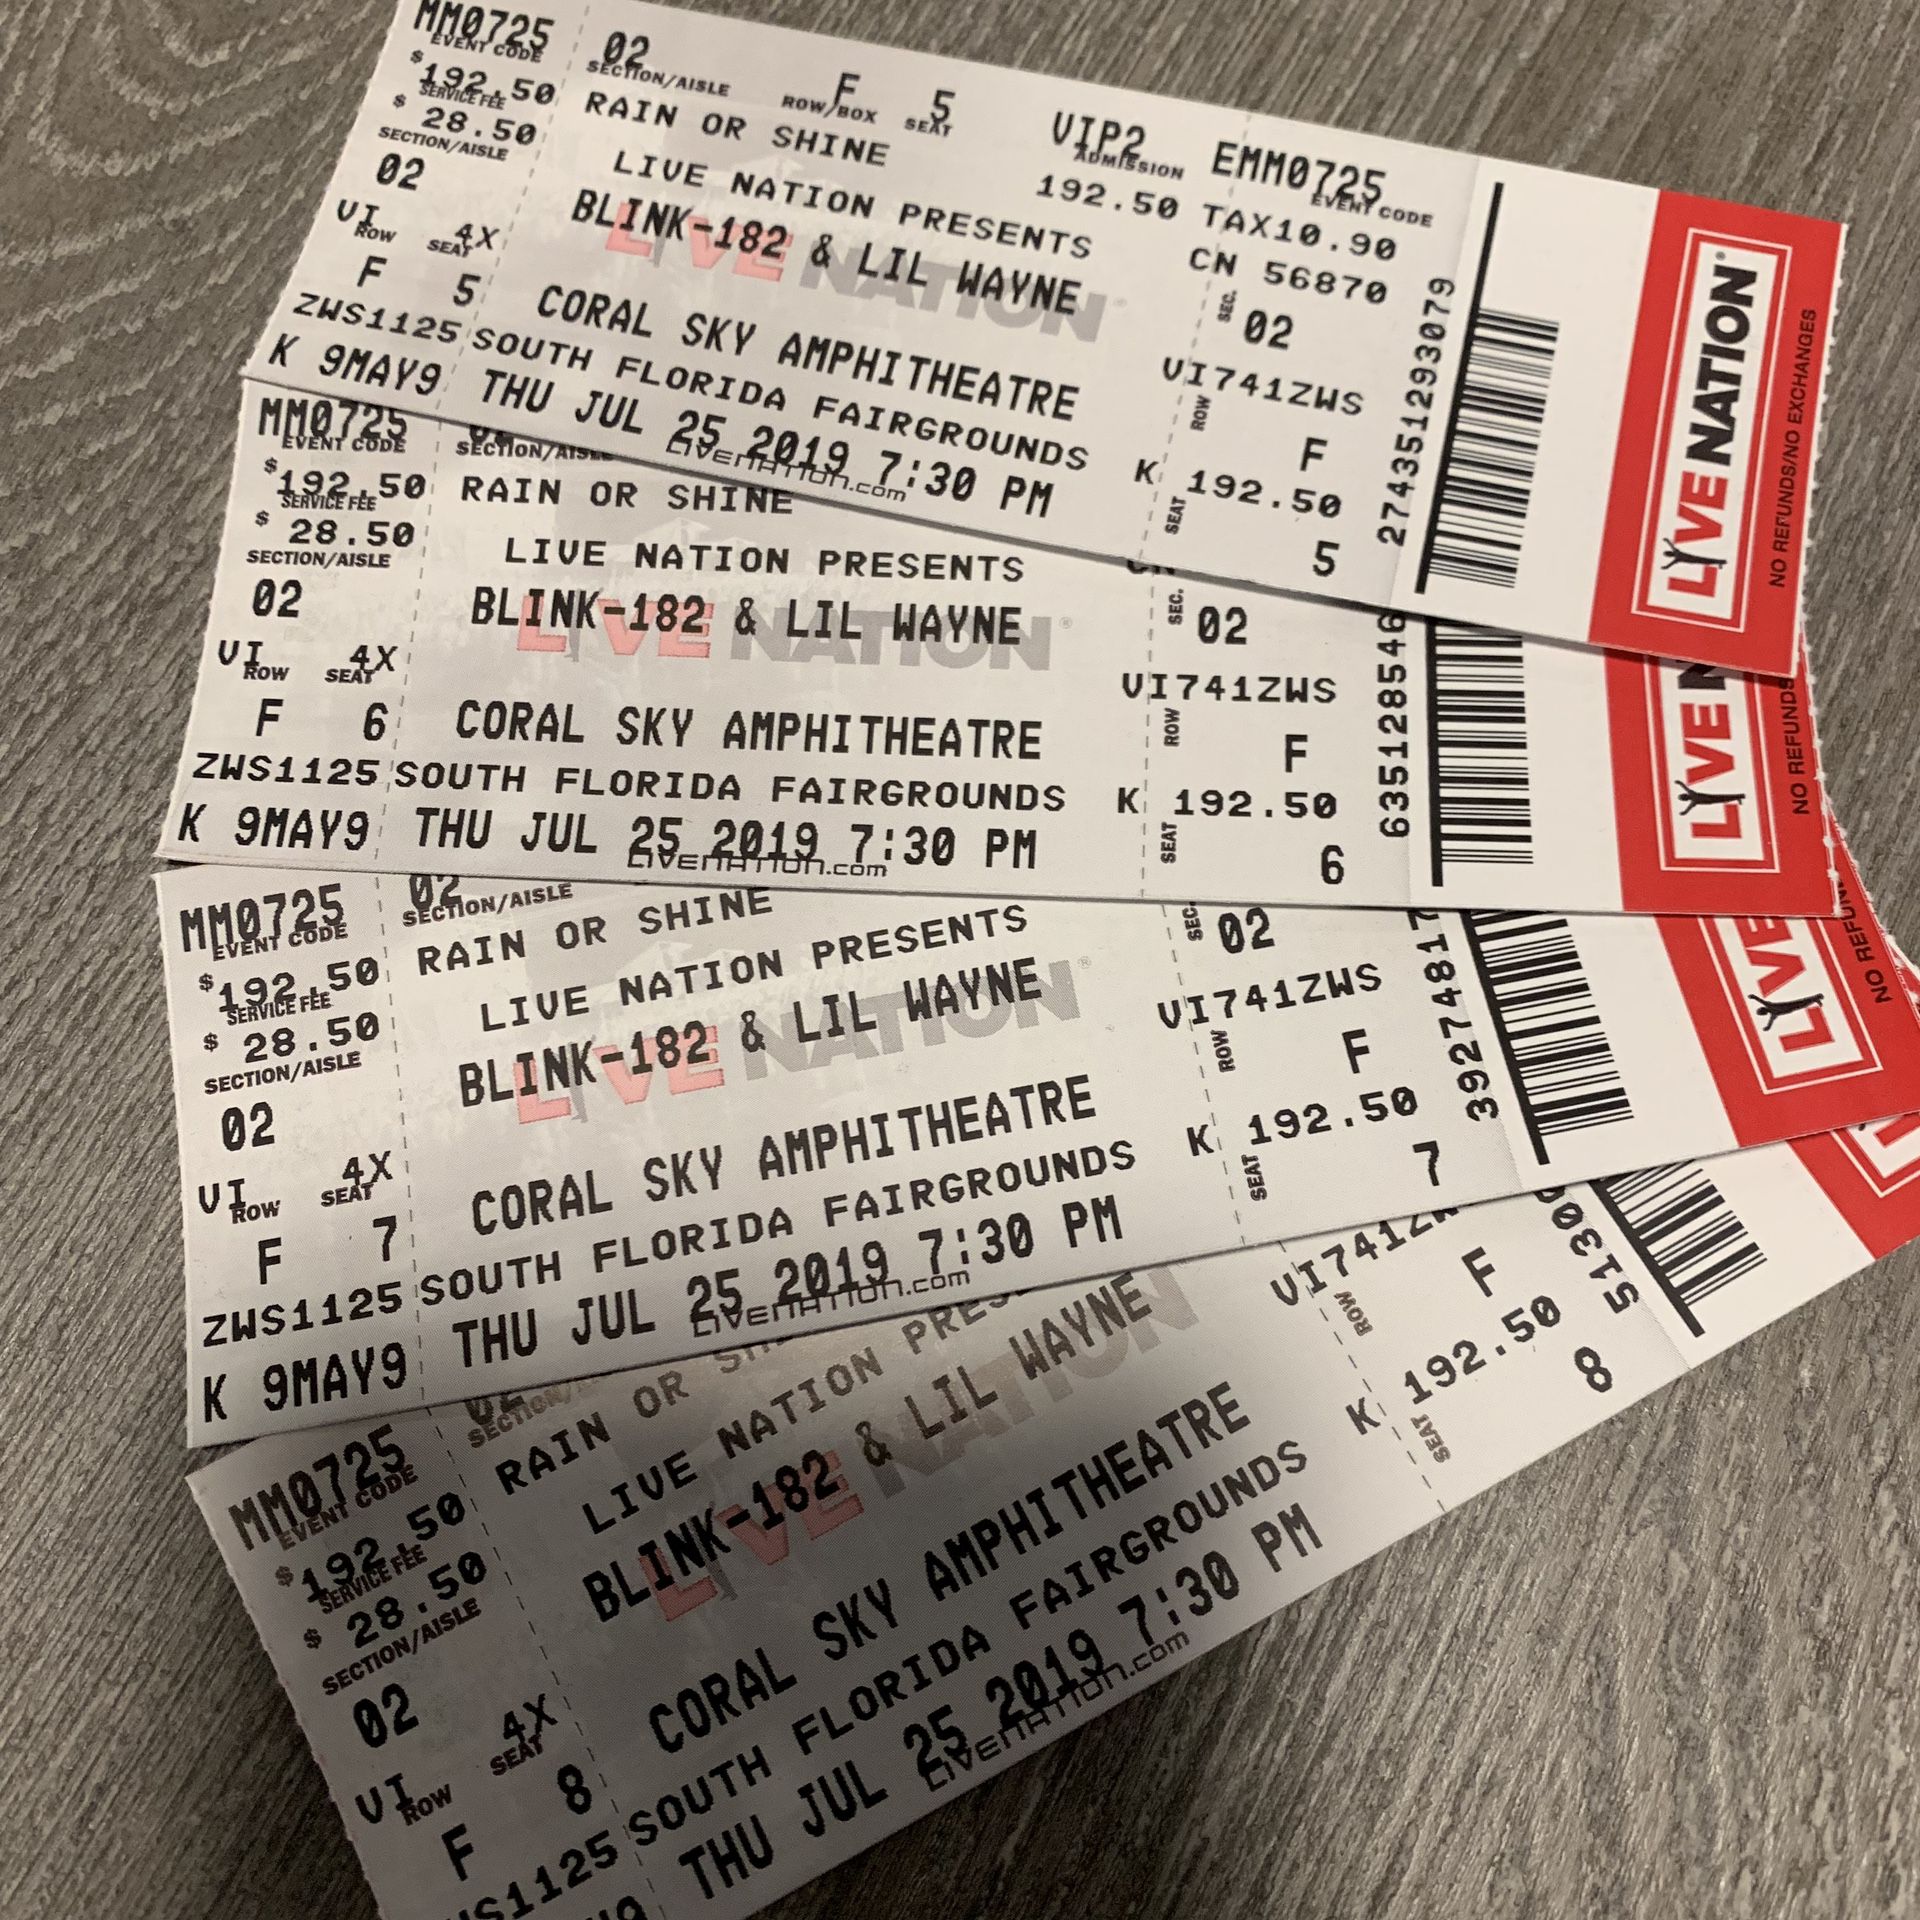 Blink-182 & Lil Wayne Concert Tickets Thursday 7/25/19 Coral Sky Amphitheater - Next to Stage